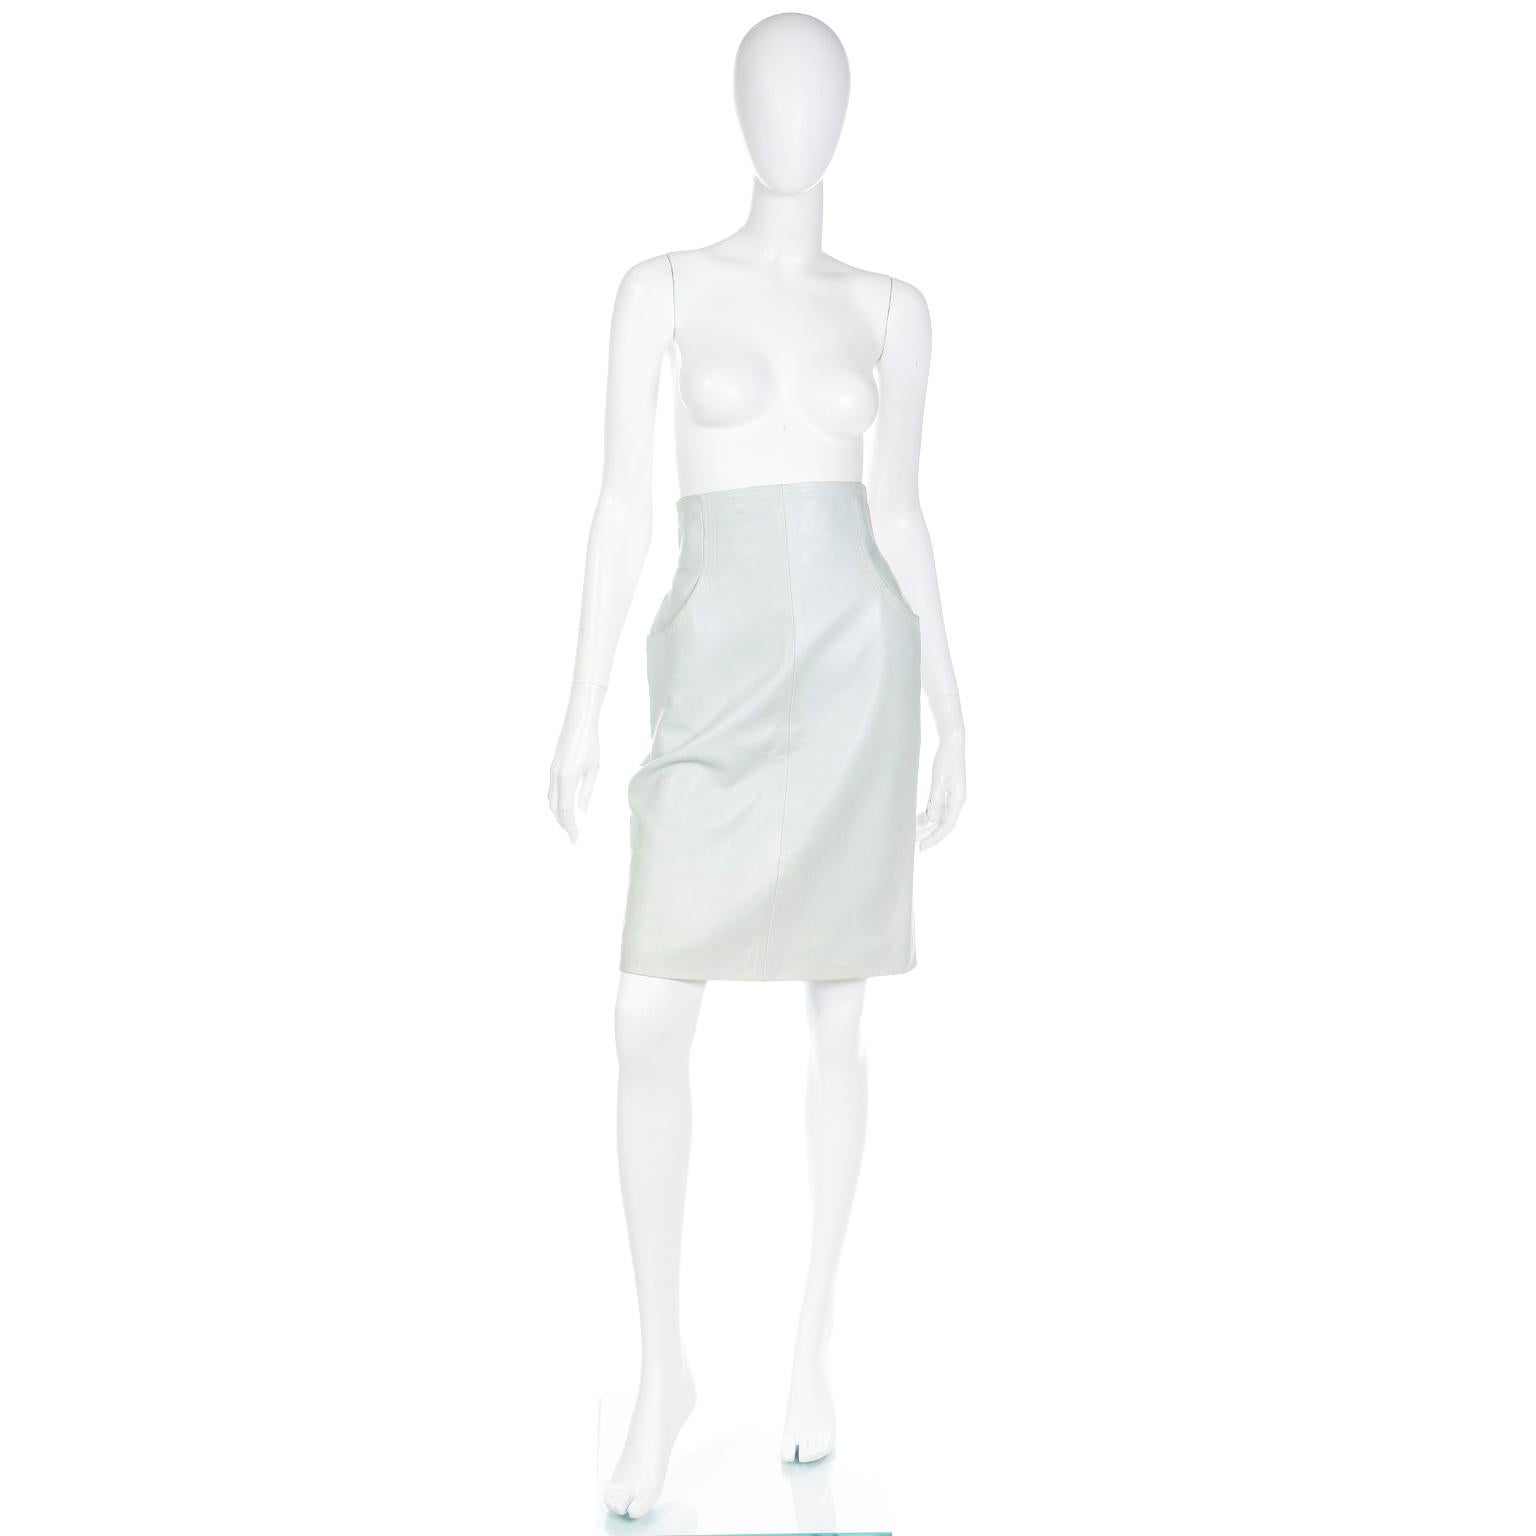 This gorgeous Chanel pale mint green lambskin leather skirt is such a fabulous piece with a great high waist and lovely details. This opaque 100% lambskin leather skirt has signature CC monogram silk lining and unique zig zag topstitching along